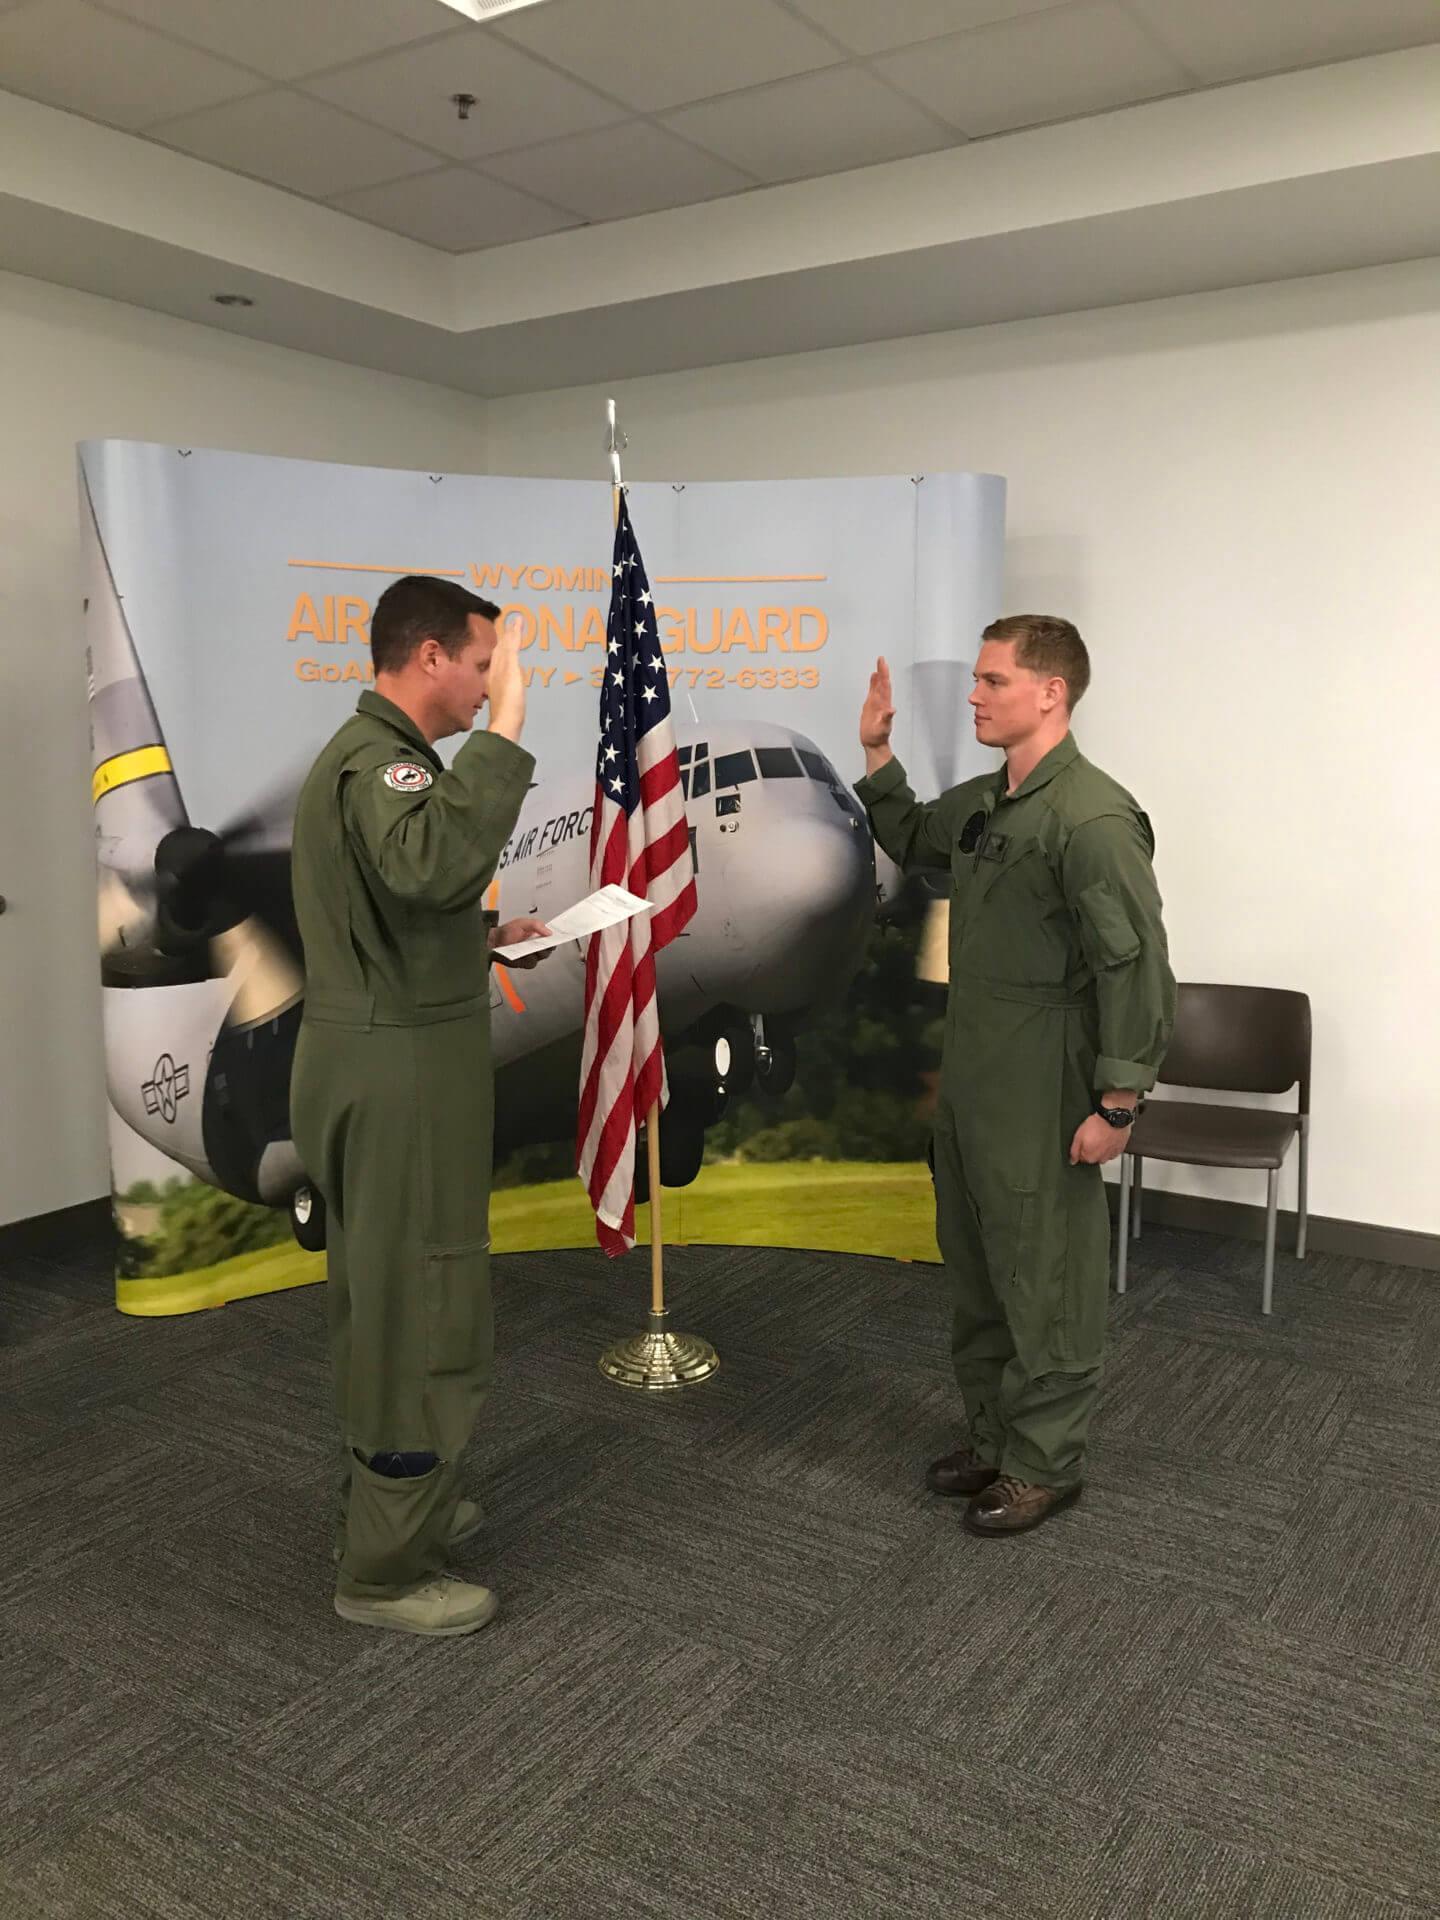 Edward Proulx gets sworn into the Air Force by LtCol Gobel. (Photo/Courtesy of Edward Proulx)